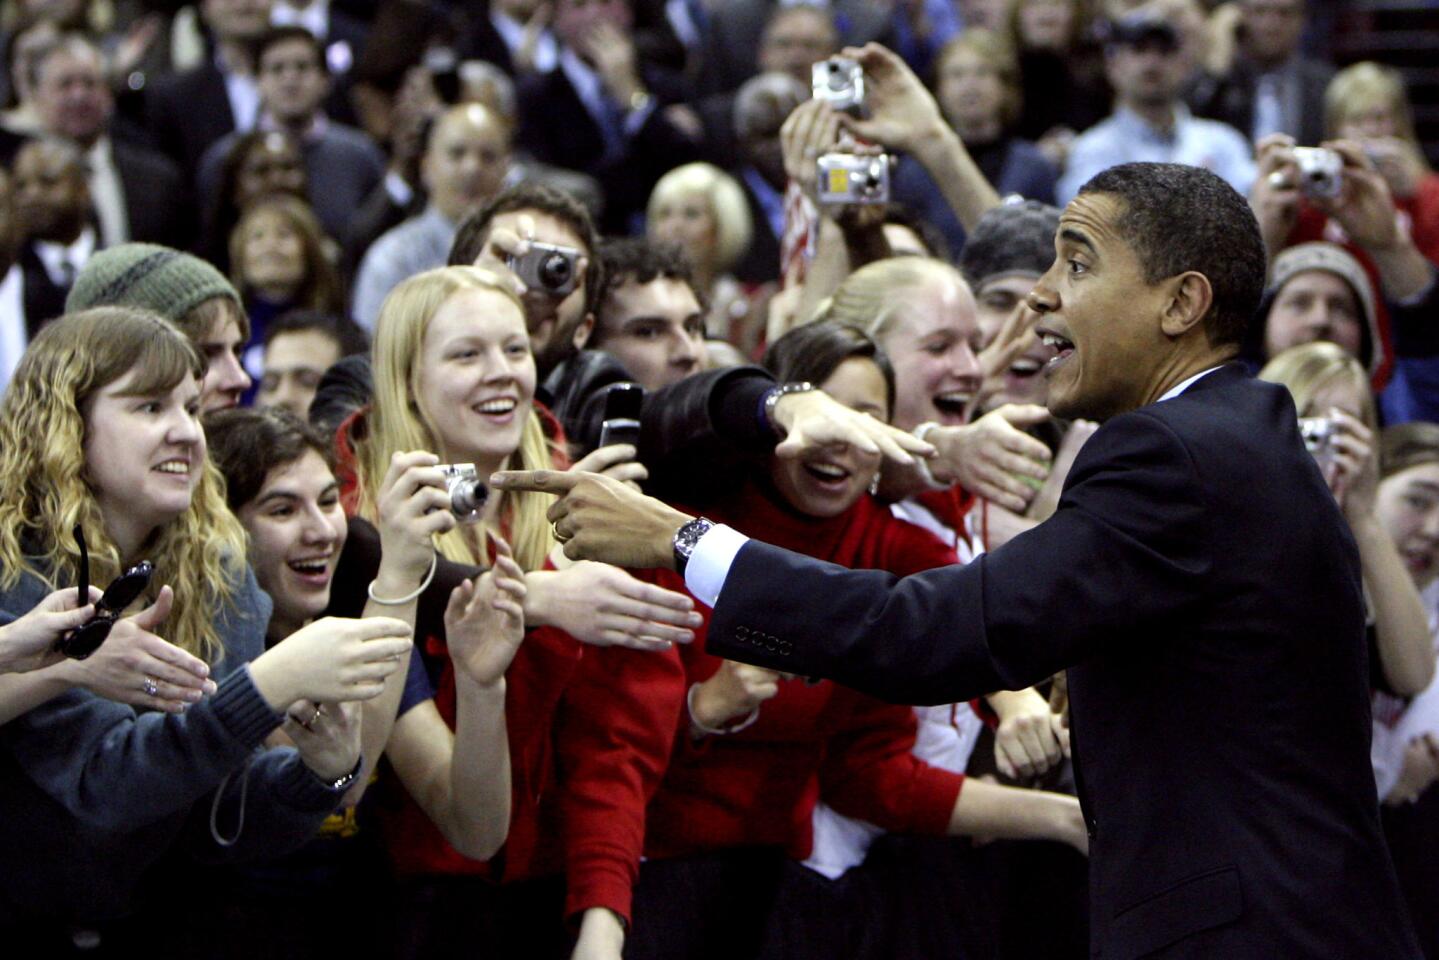 In this Feb. 12, 2008, photo, presidential candidate Sen. Barack Obama greets supporters before a rally in Madison, Wis. President Obama is returning to the University of Wisconsin to ask young voters who helped propel him to the White House to support Democrats in key governor and U.S. Senate races.